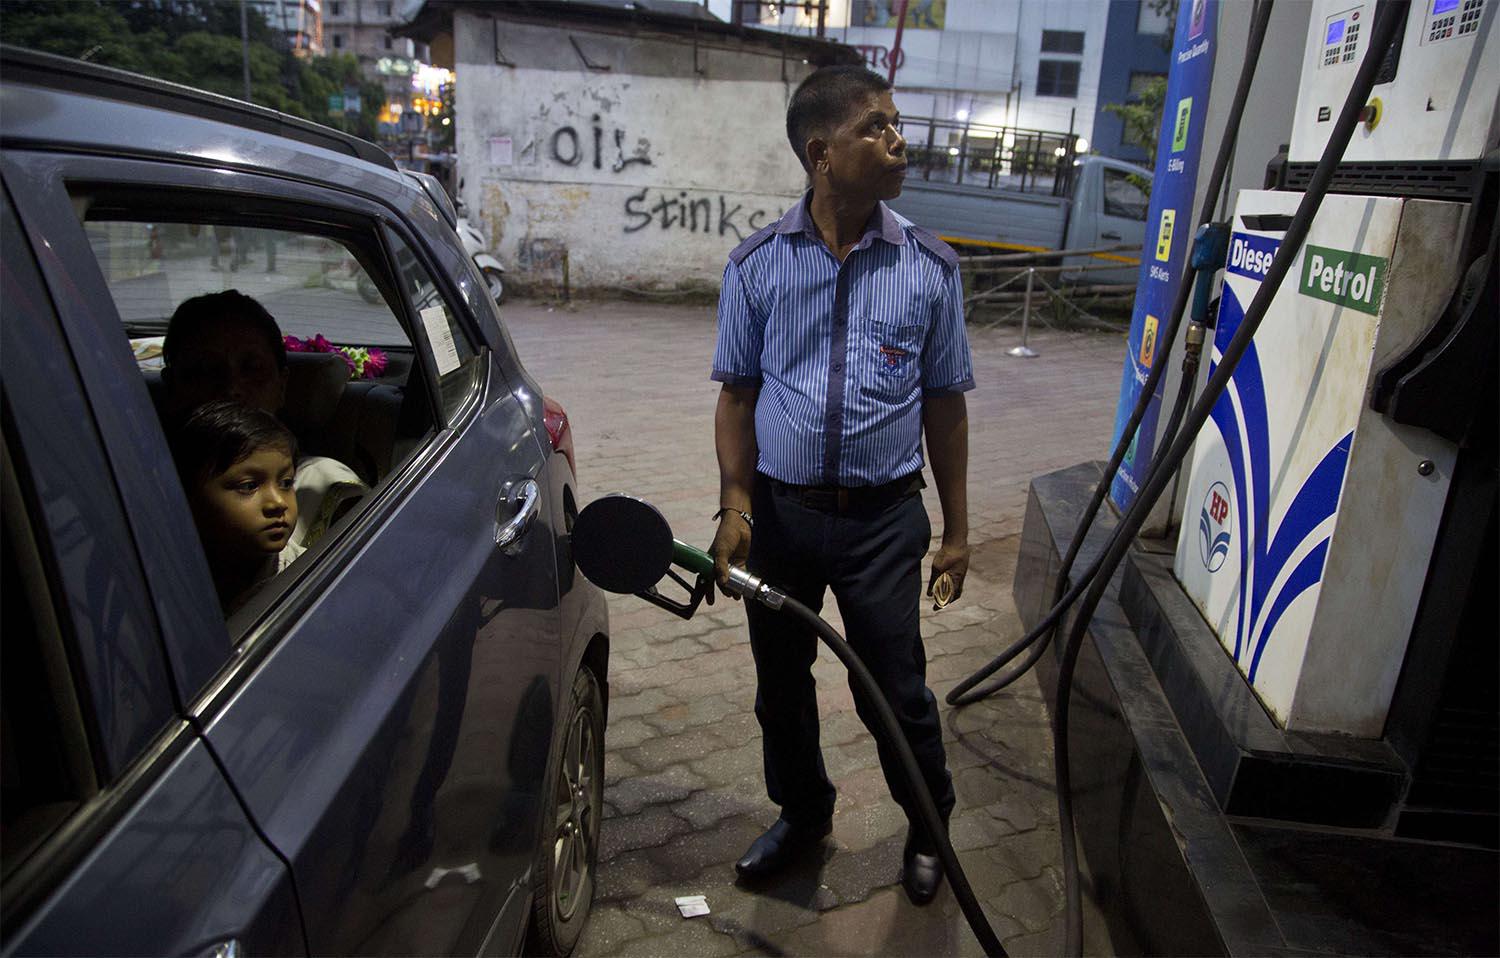 Indians get fuel filled in their car at a petrol pump in Gauhati, India